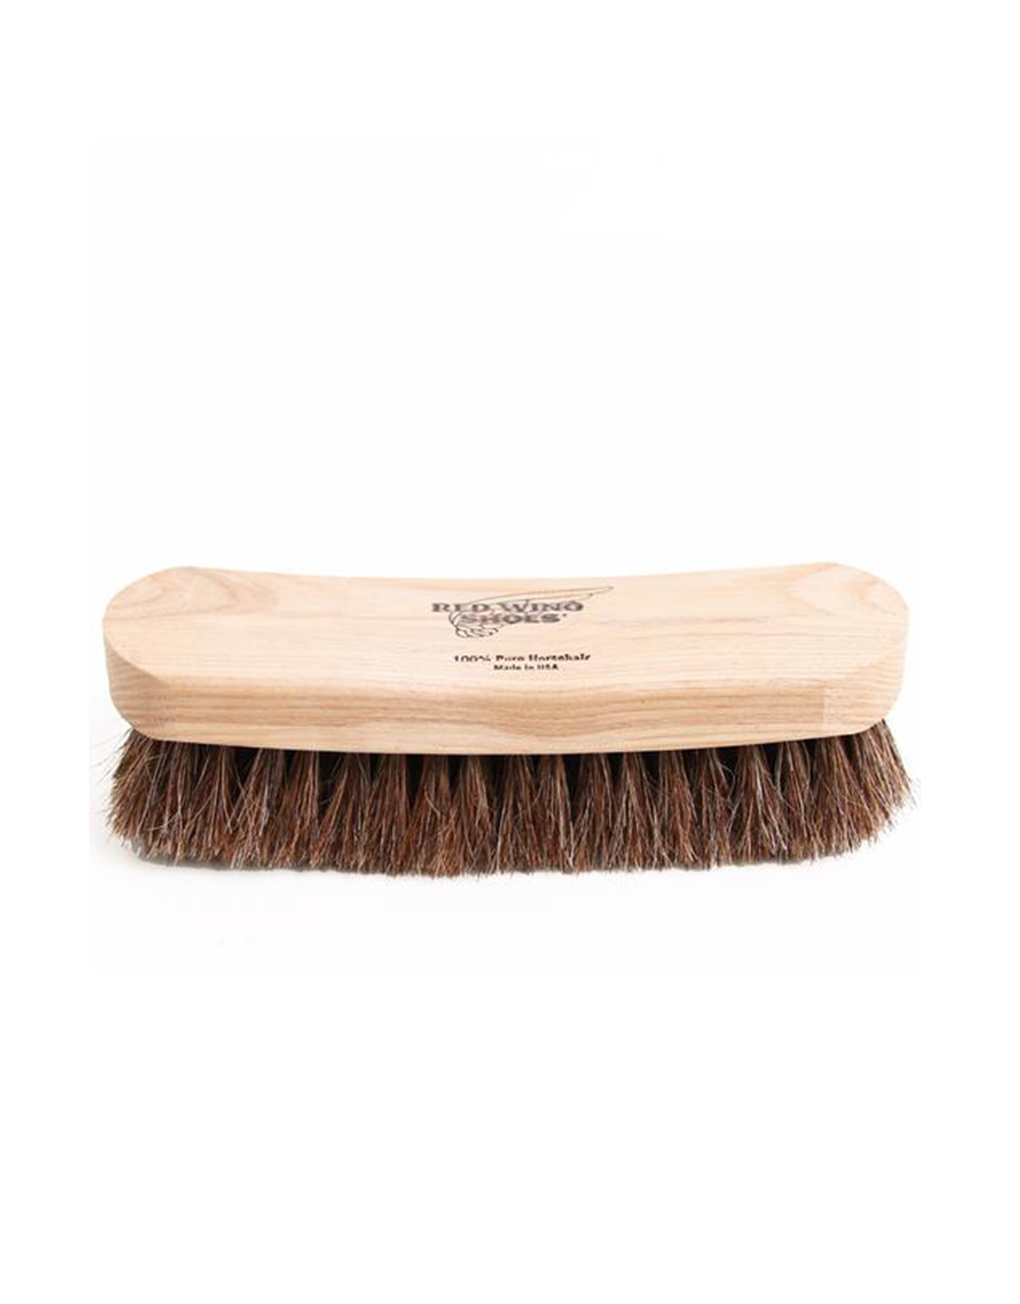 Red Wing Shoes - Boot Brush